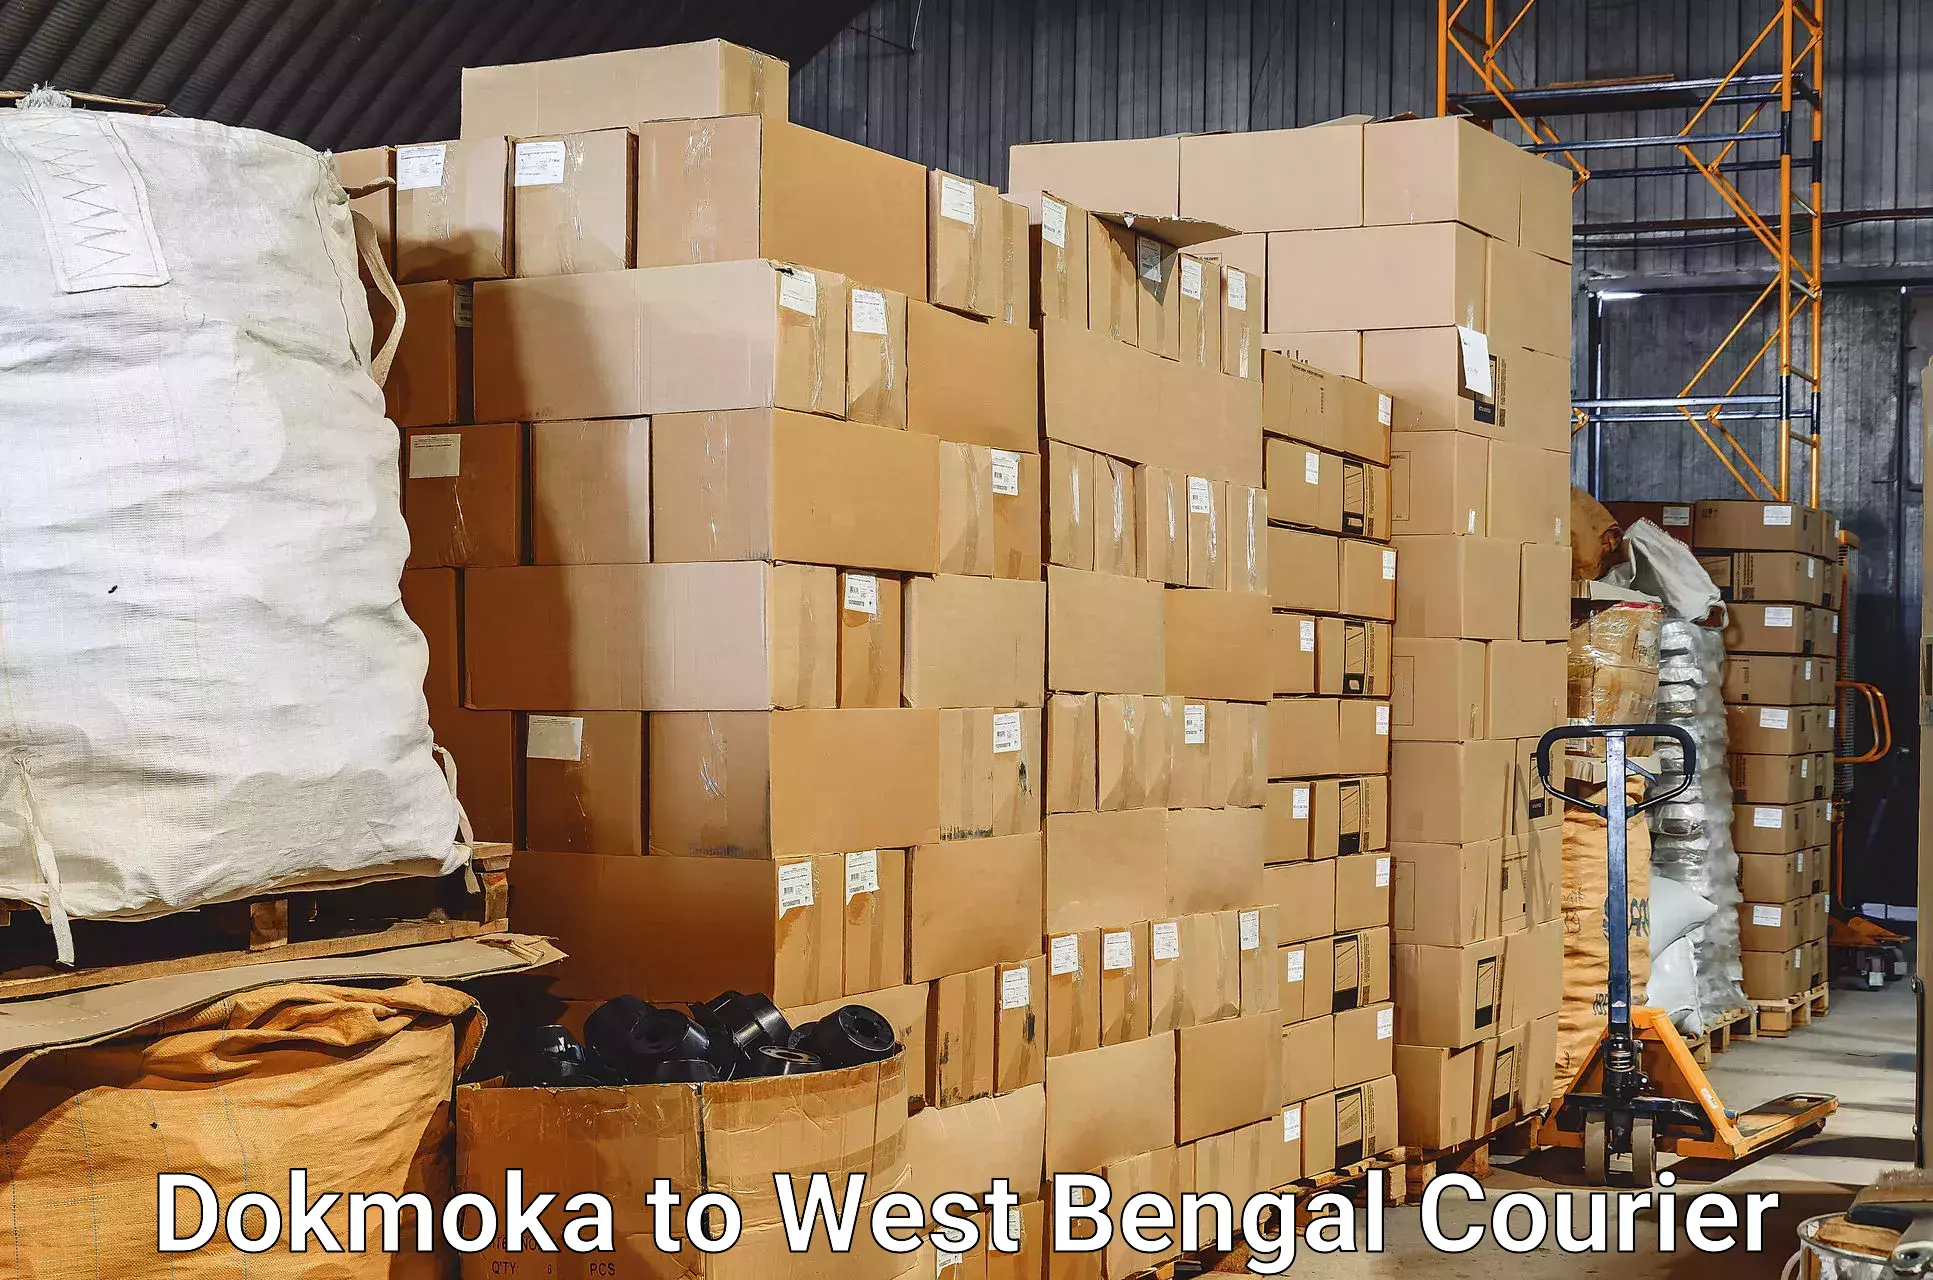 Reliable baggage delivery in Dokmoka to Surjapur